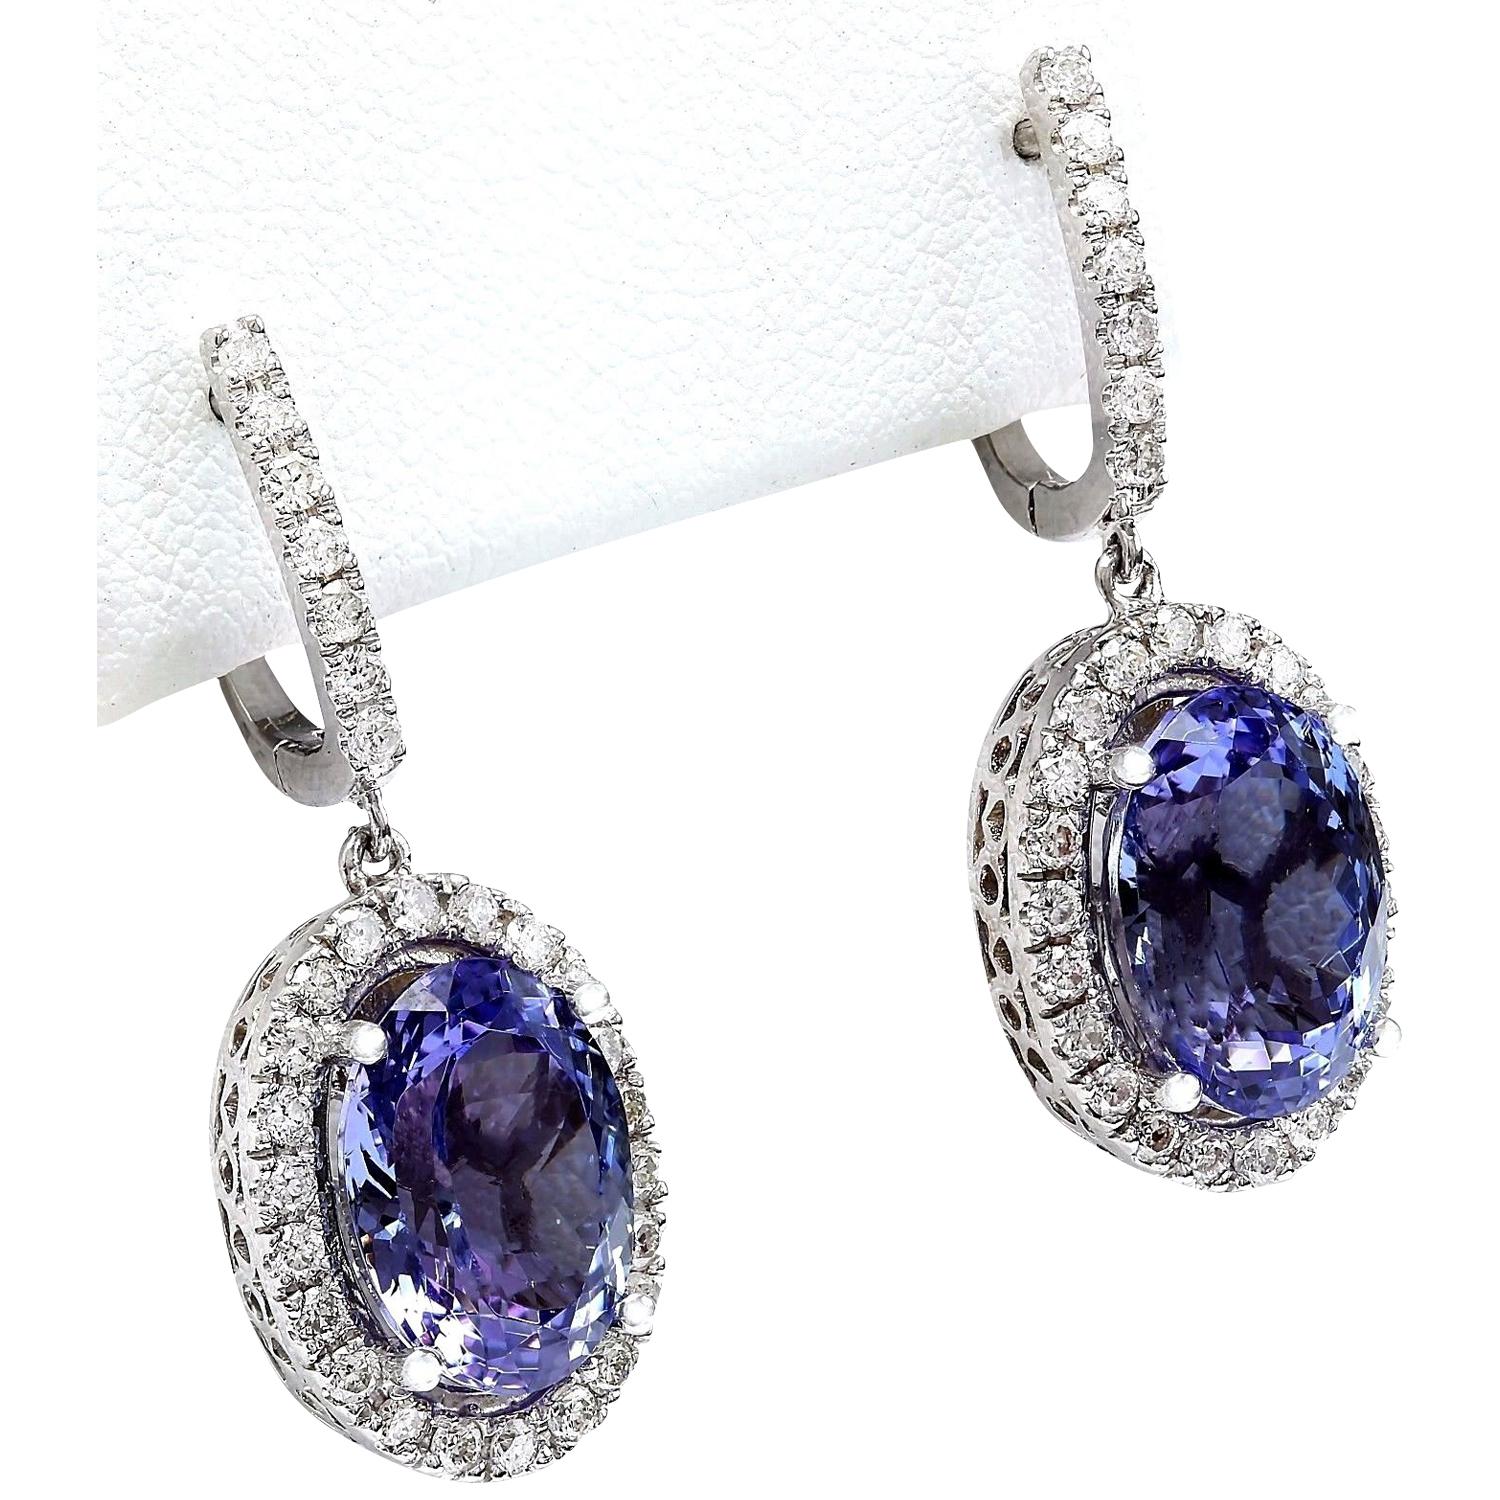 10.30 Carat  Tanzanite 18K Solid White Gold Diamond Earrings
Item Type: Earrings
Item Style: Drop
Item Length: 1.30 in
Material: 18K White Gold
Mainstone: Tanzanite
Stone Color: Blue
Stone Weight: 9.00 Carat
Stone Shape: Oval
Stone Quantity: 2
Stone